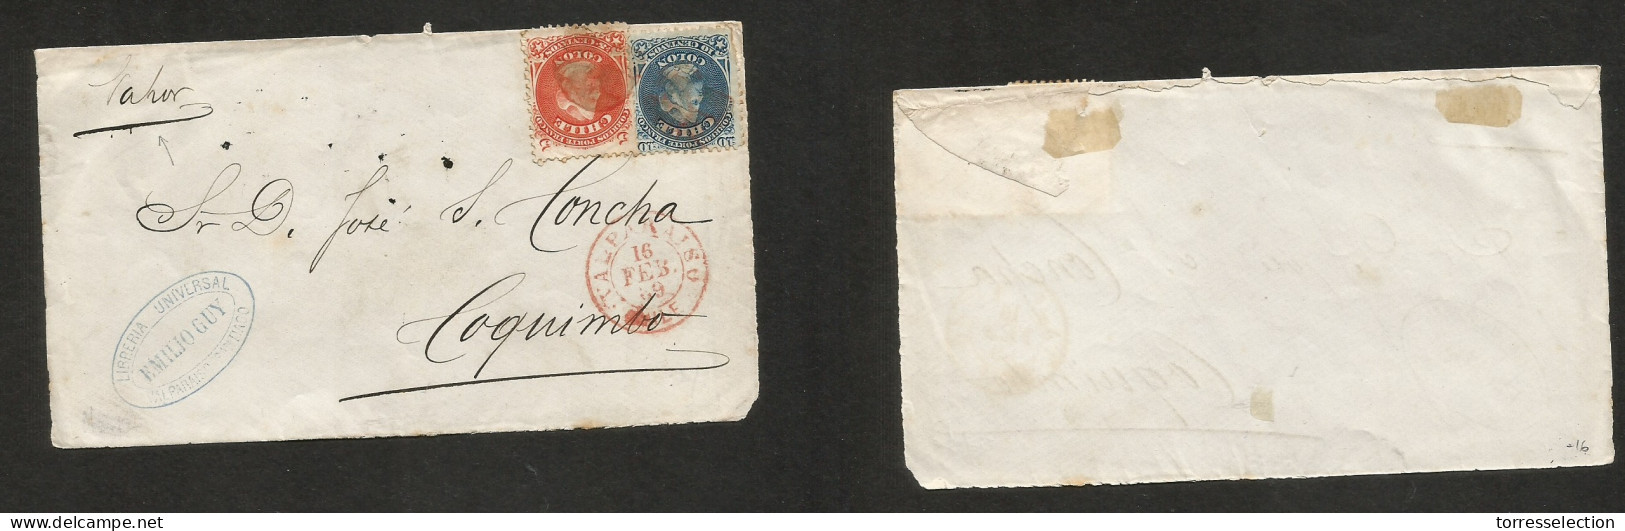 CHILE. 1869 (16 Feb) Valp - Coquimbo. Por Vapor Cover Front Fkd 5c + 10c Second Design, Tied Cork + Red Cds. Opportuniy. - Chile